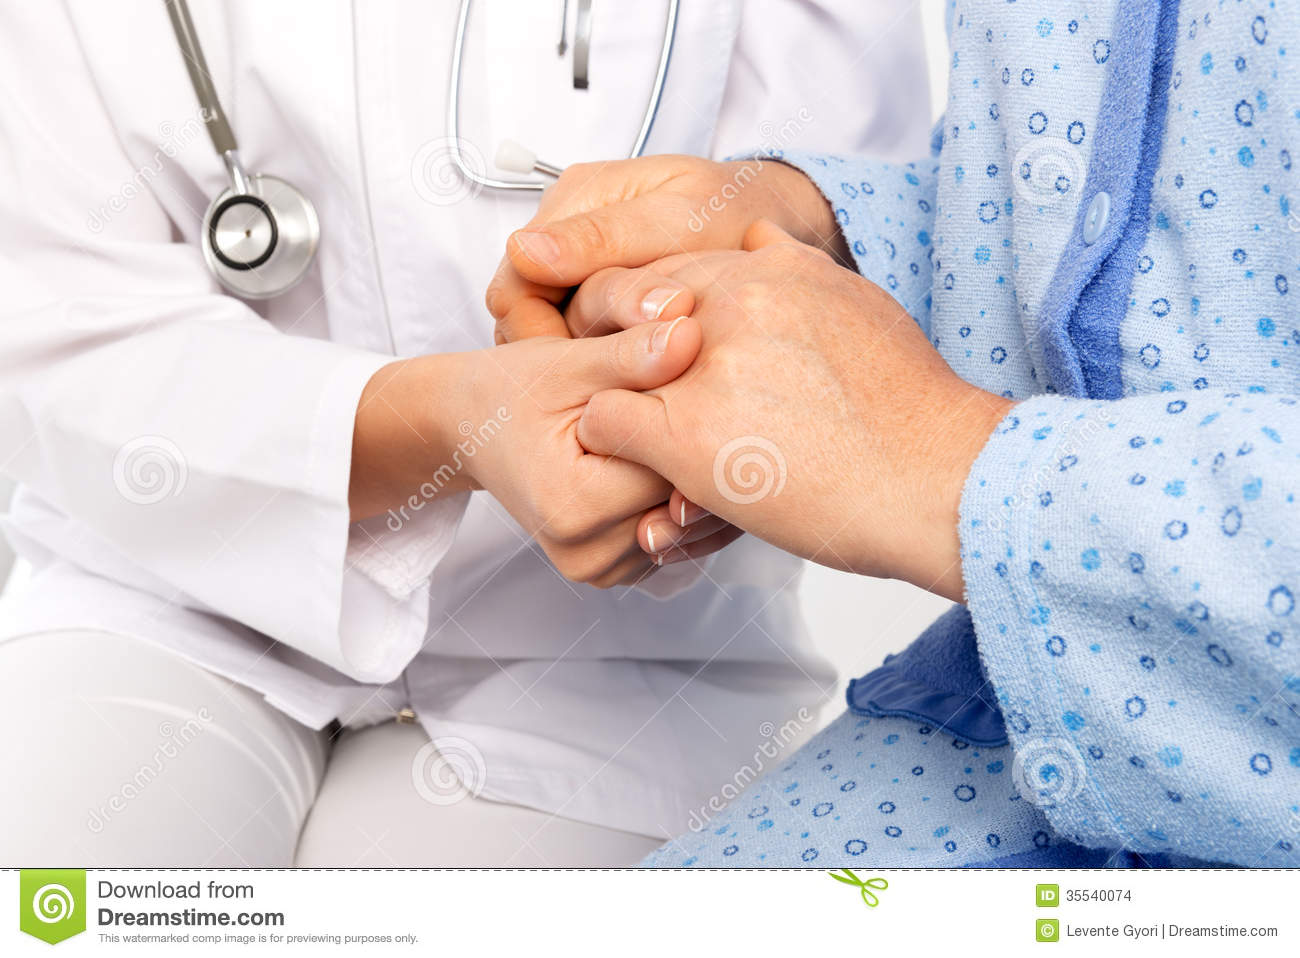 Patient Hand Holding Stock Images   Image  35540074